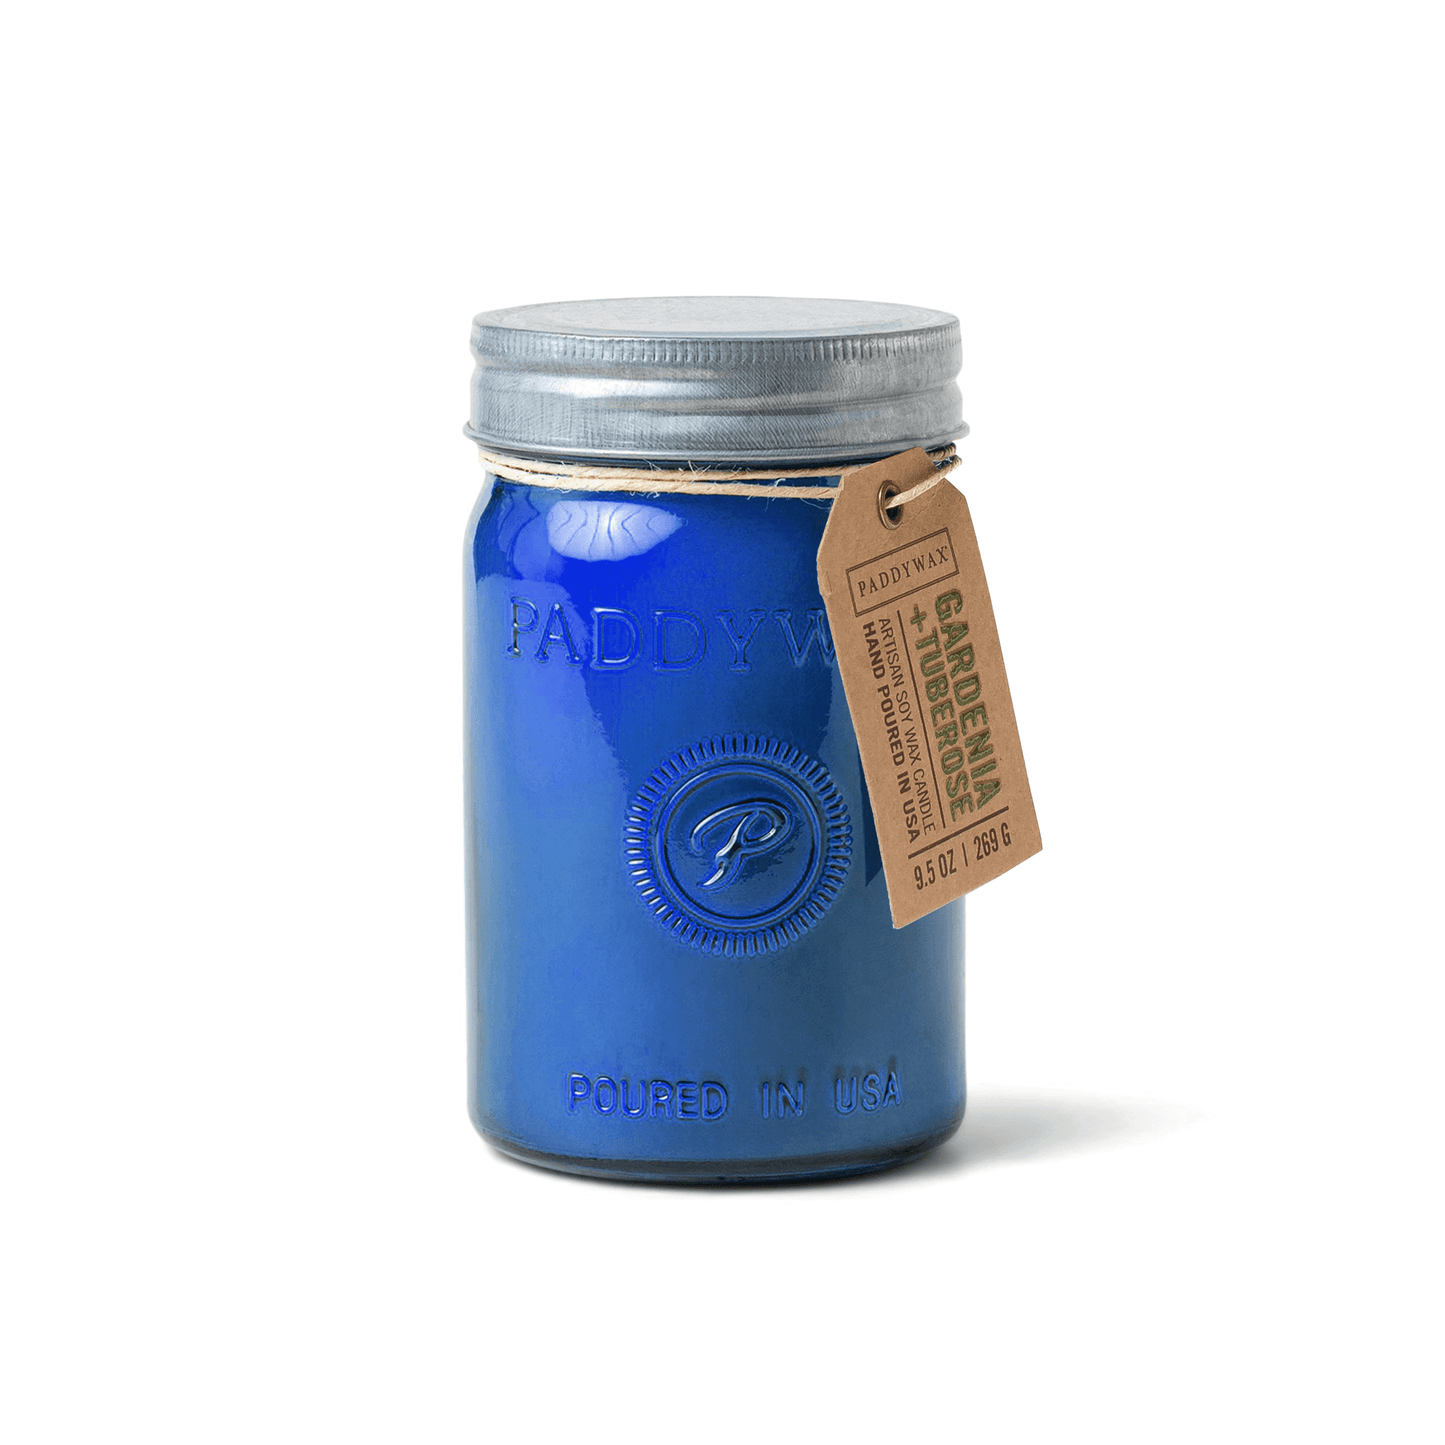 Relish 9.5 oz Candle - Gardenia + Tuberose - royal blue colored glass vessel with tin lid